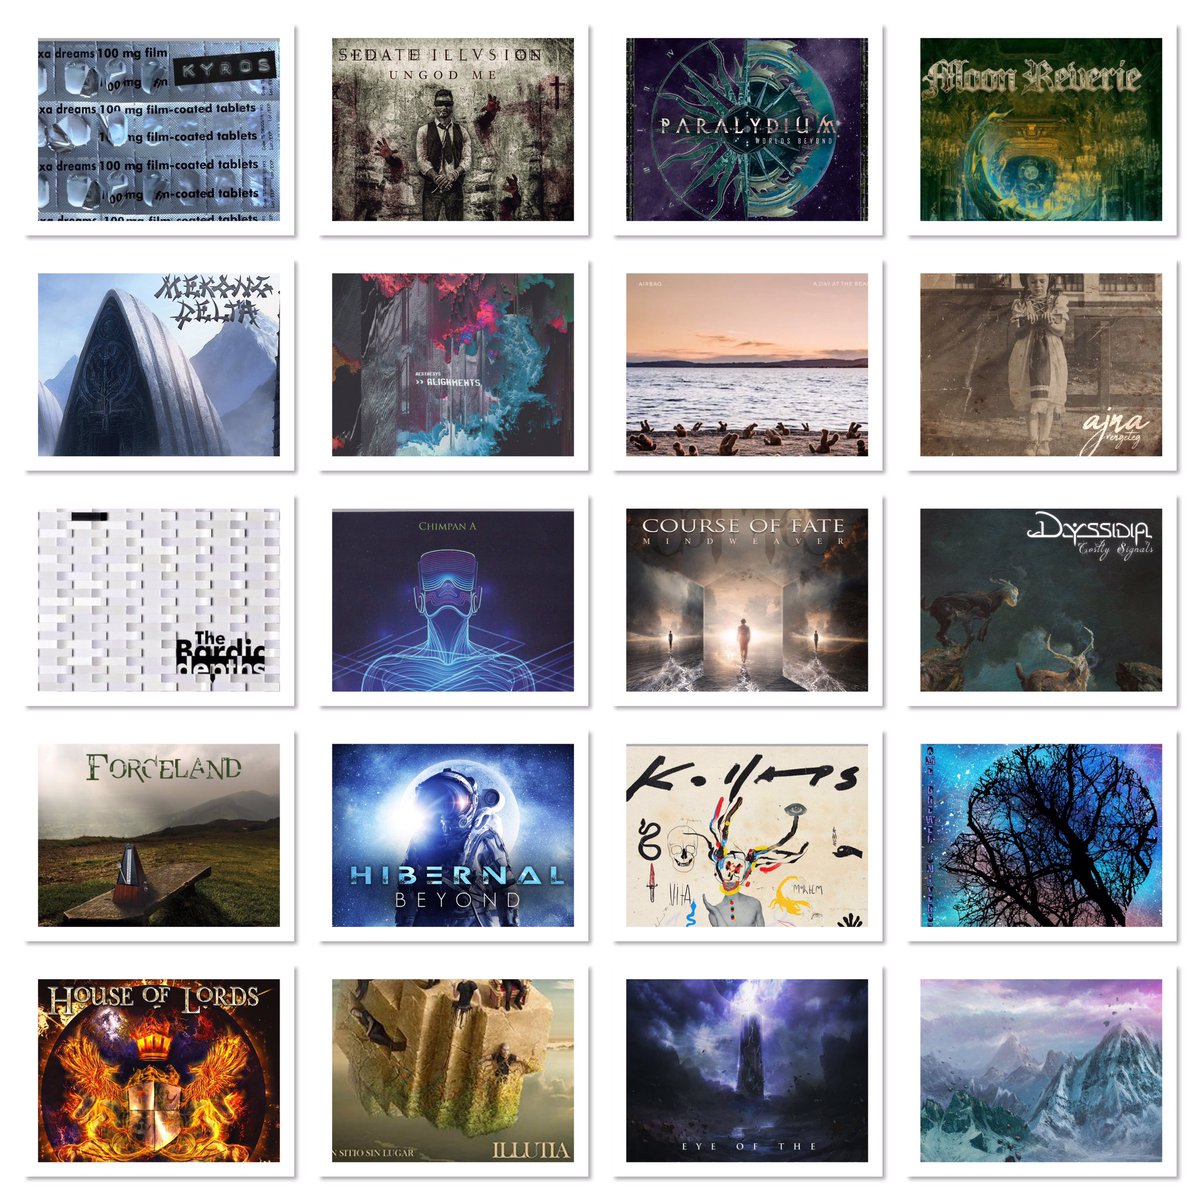 My top picks for June: All fantastic albums that i highly recommend!!

🙏🔥🔥🔥🎤🎸🎹🥁🔥🔥🔥🙏

#ProgRock
#MelodicRock 
#ProgMetal
#NeoClassicalMetal 
#TopPicks